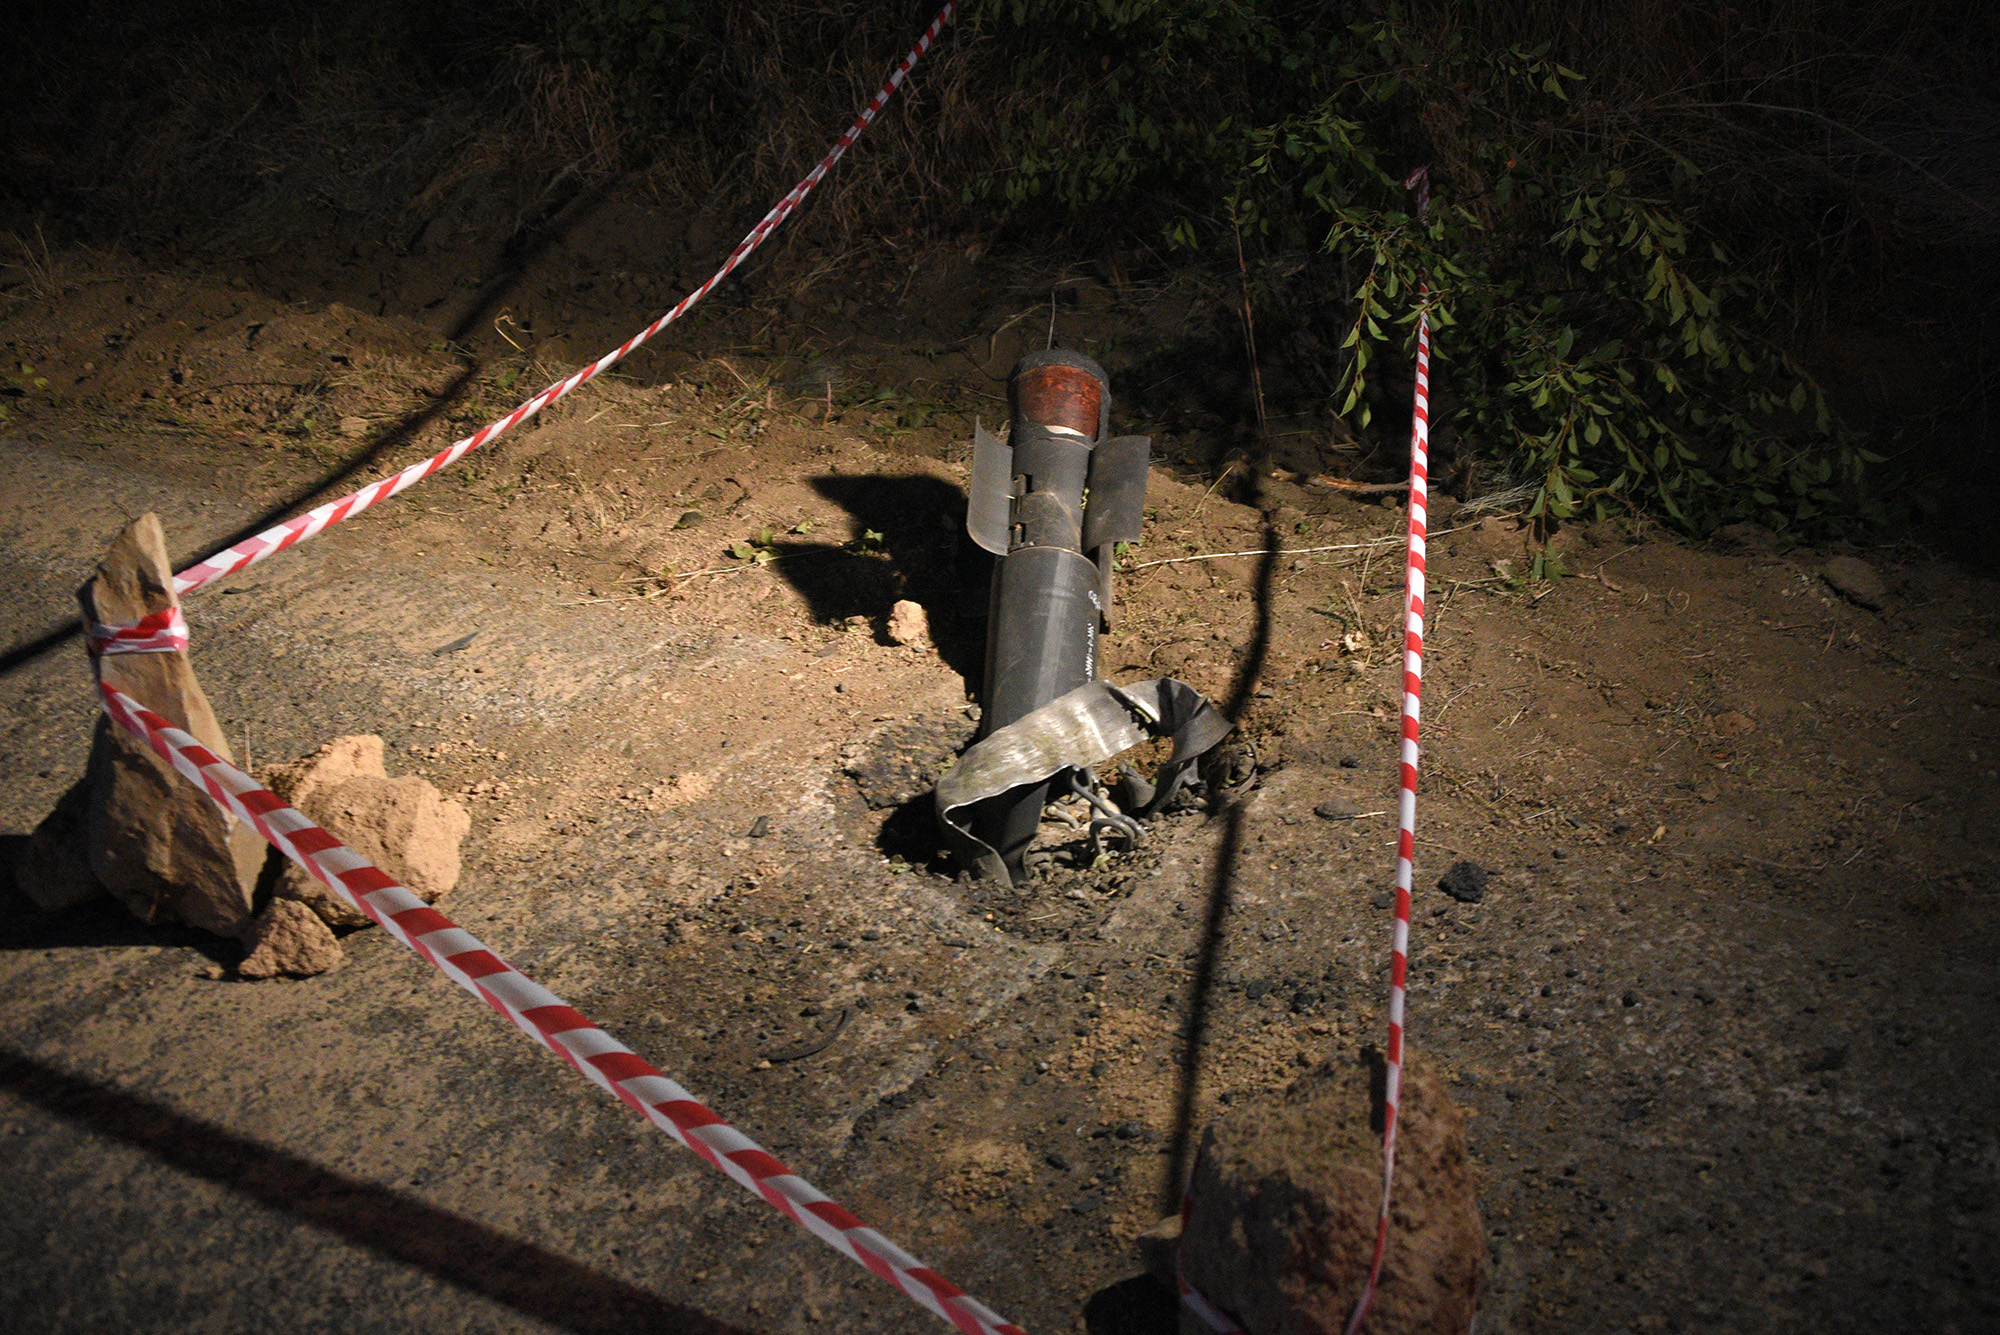 An unexploded rocket in&nbsp;a road outside the town on Jermuk, Armenia on Sept.&nbsp;15.&nbsp;